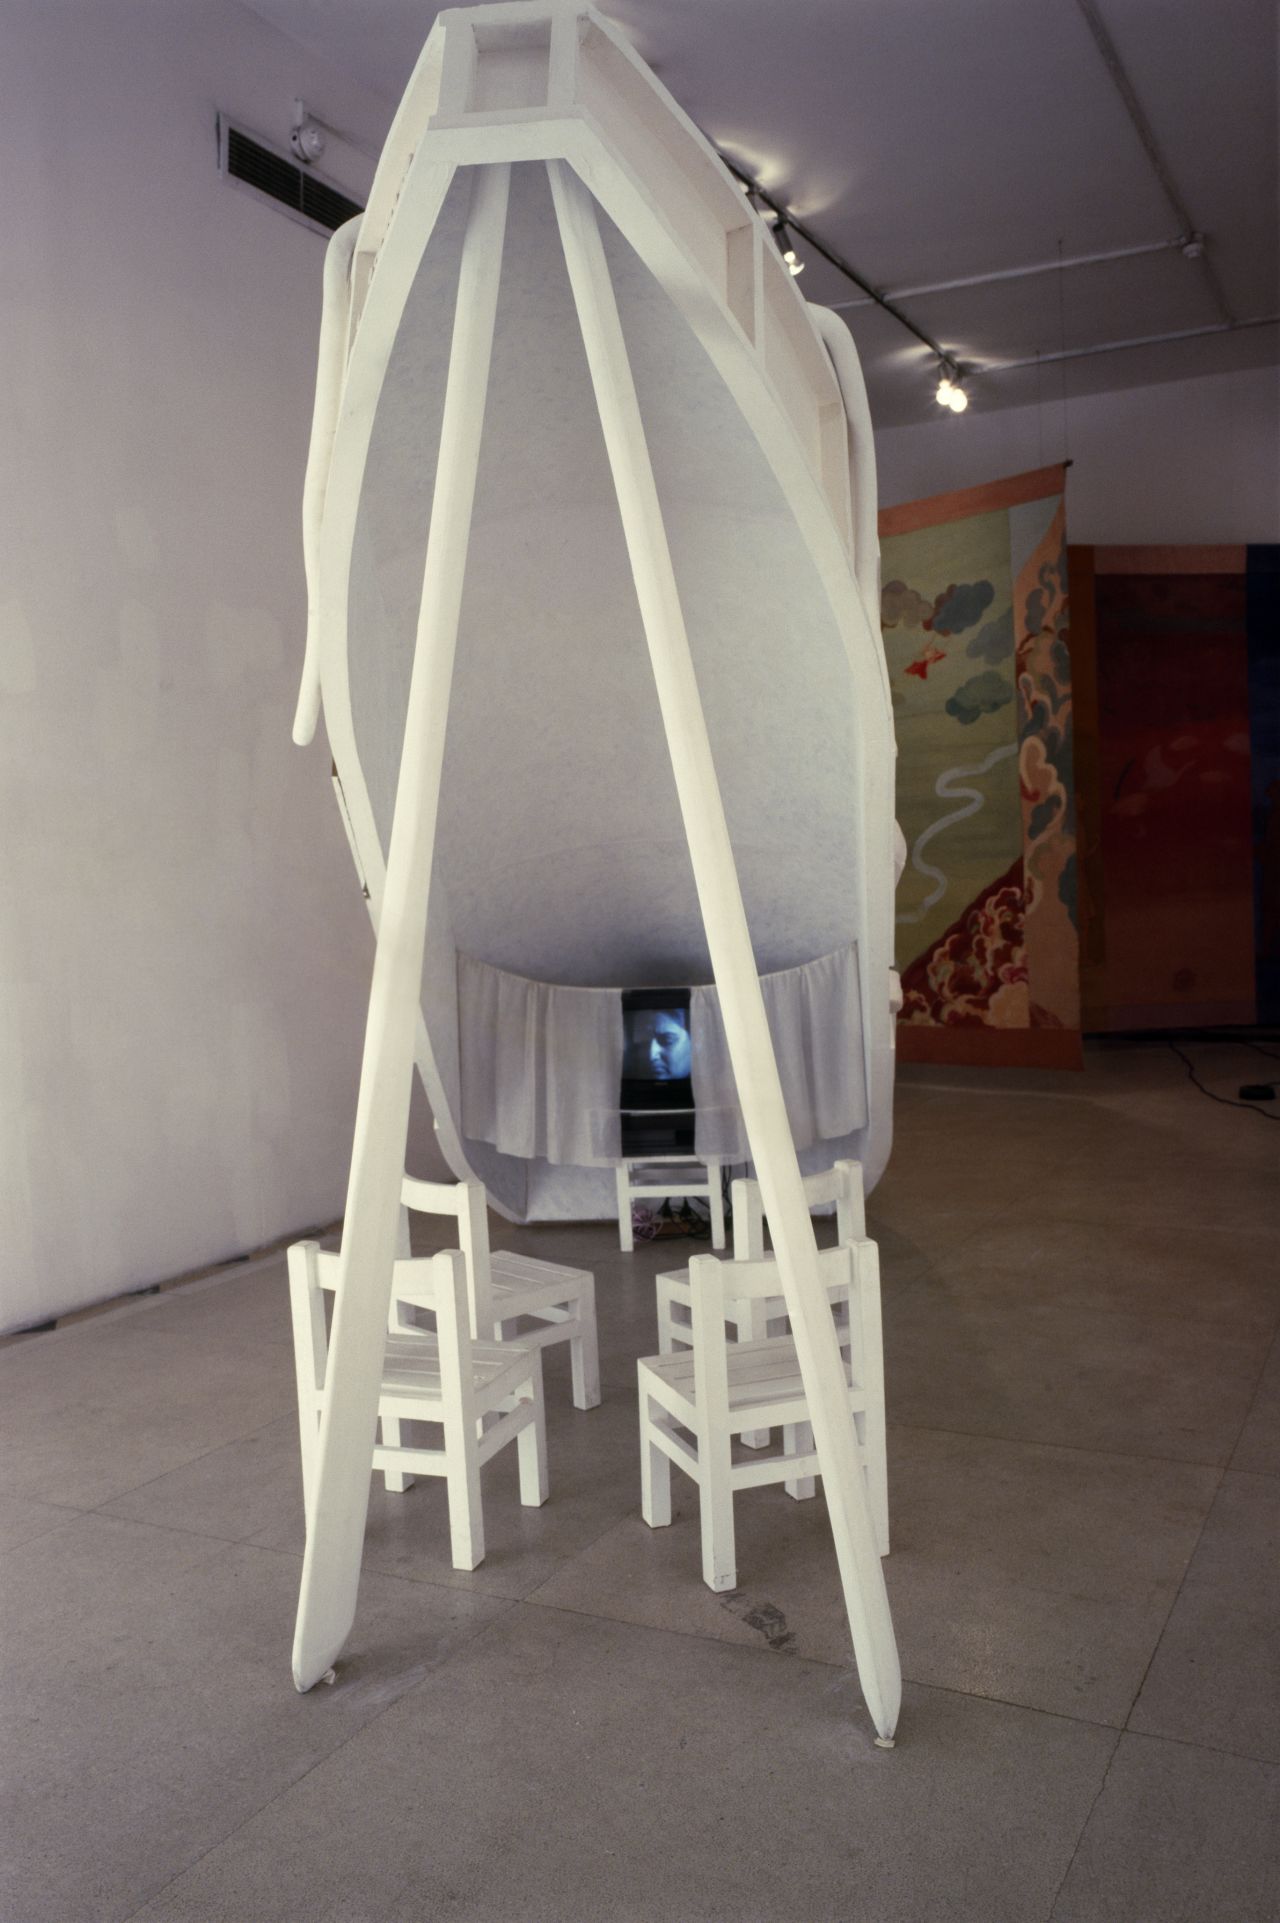 Detail from "Carrier" (1994). Sundaram's installations are often monumental in scale and have a strongly interactive element with the viewer.